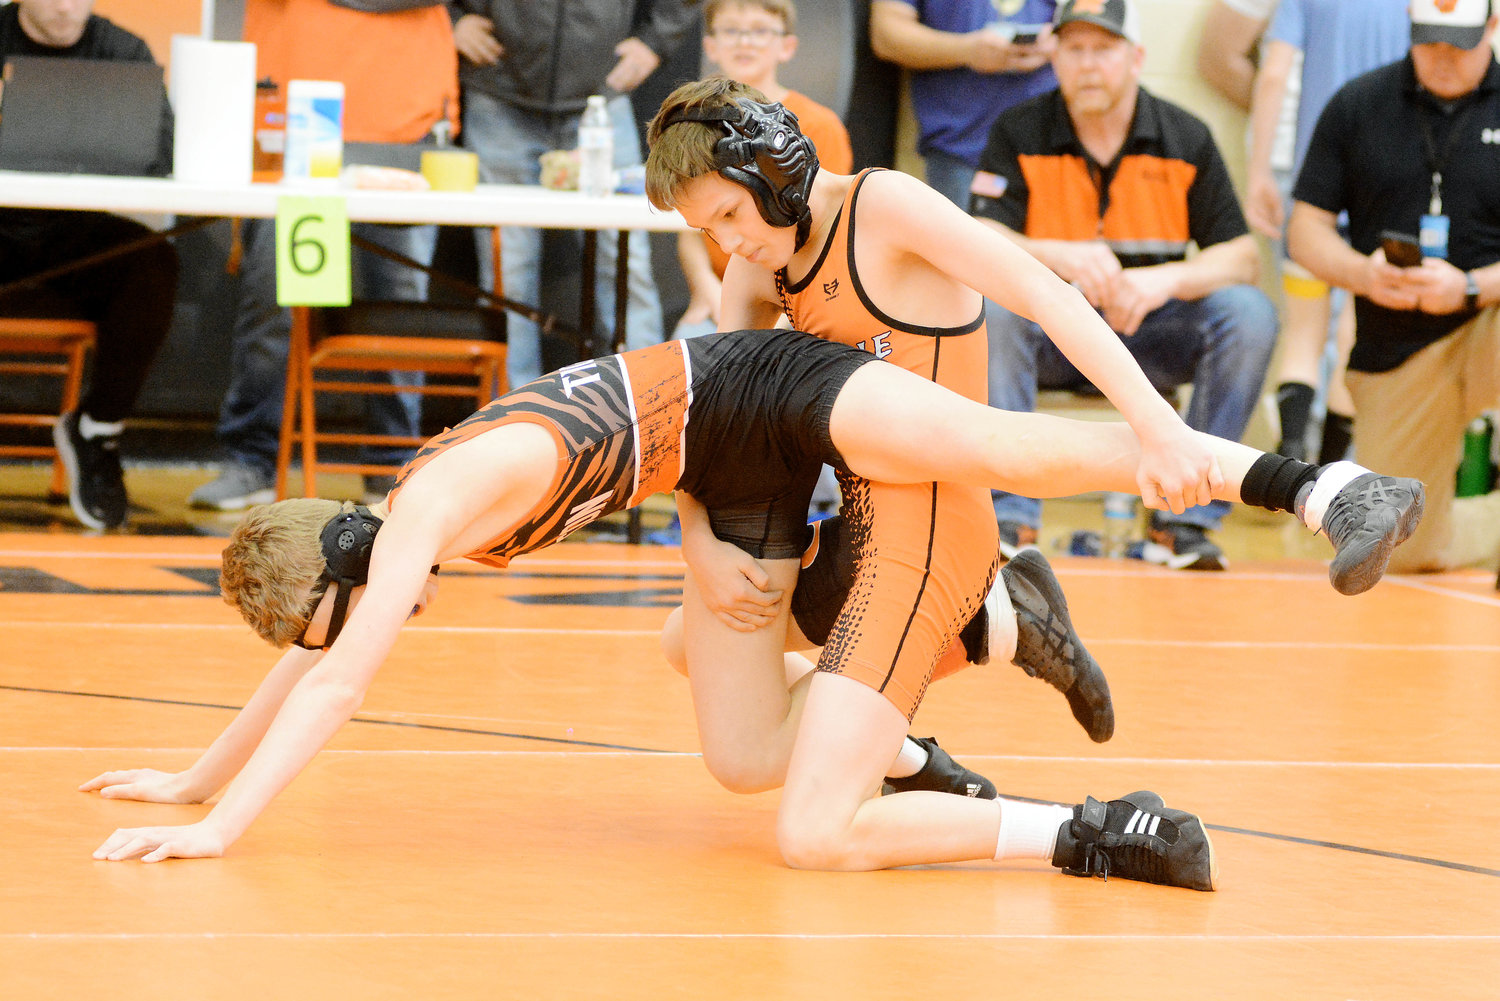 Mason Turner (solid orange singlet) gains control of Macon’s Ben Seiler during their second-round consolation match at 100 pounds in the 12-and-under division during Saturday’s Missouri USA District 7 Wrestling Tournament hosted by Owensville High School. Turner won a 6-2 decision over his orange and black opponent.